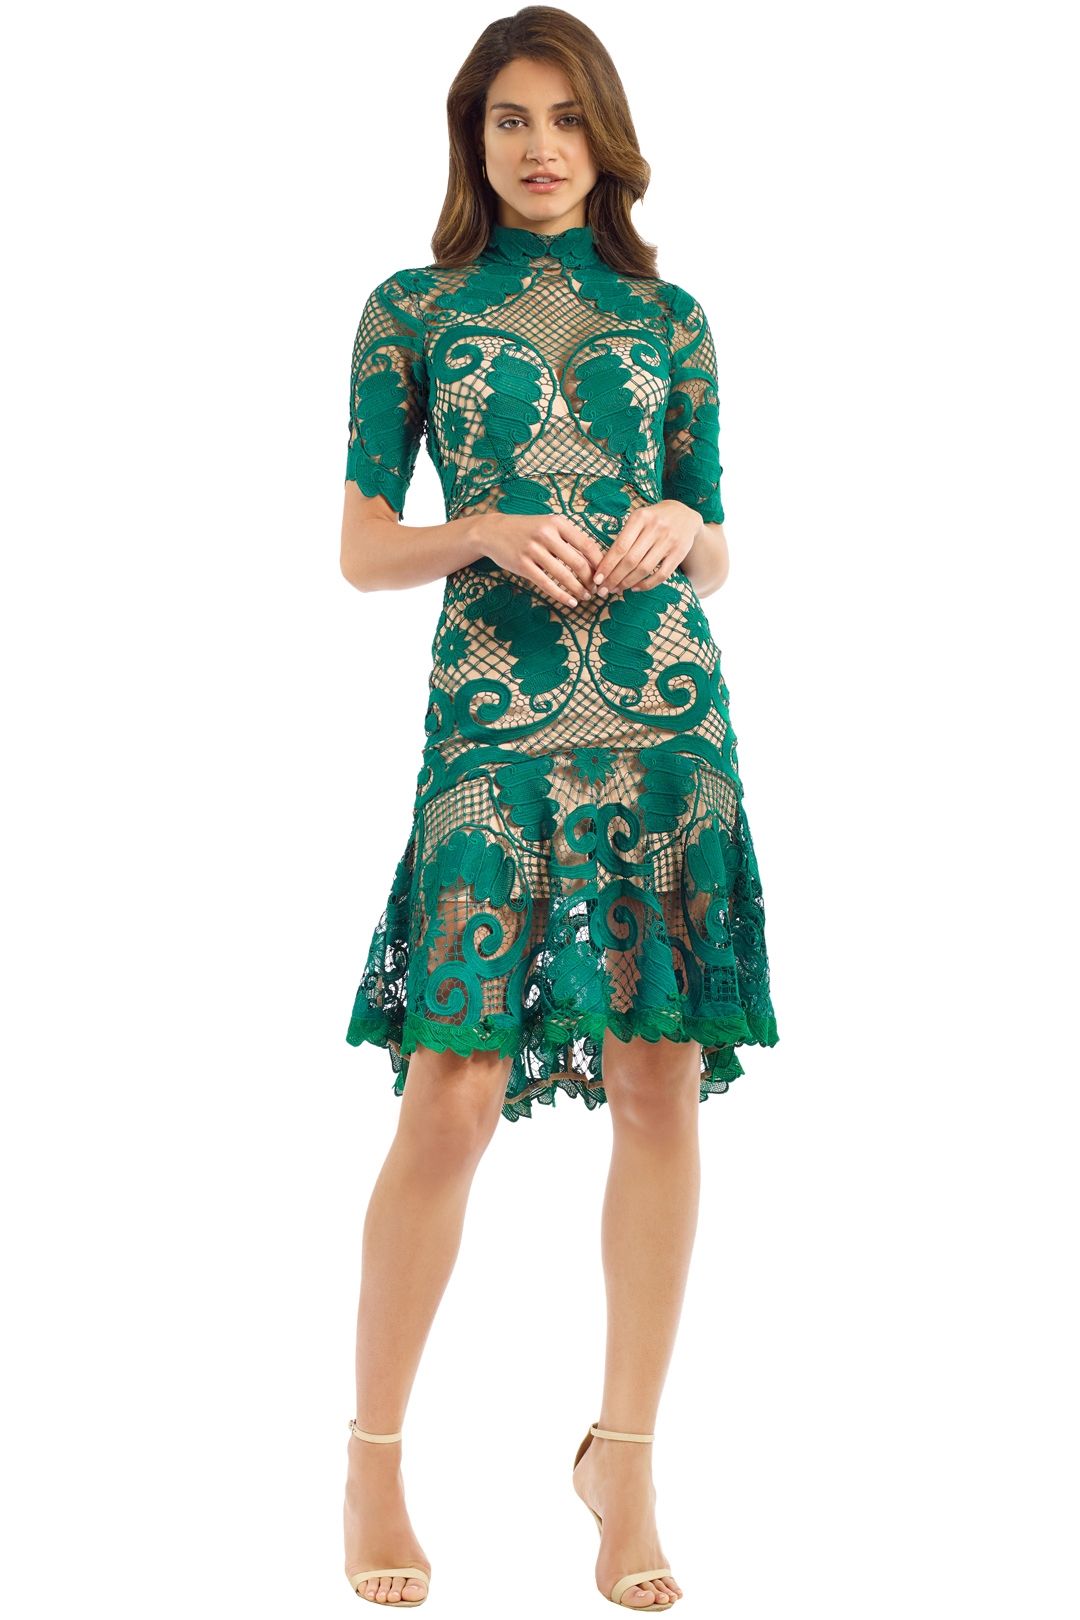 Thurley - Babylon Lace Dress - Emerald - Front